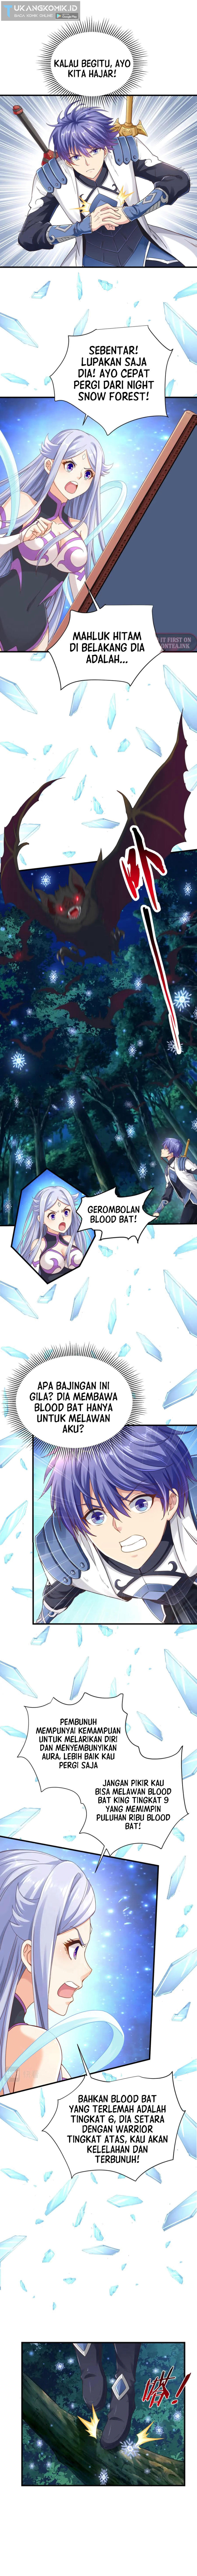 i-grinding-levels-inside-the-mirror Chapter 53